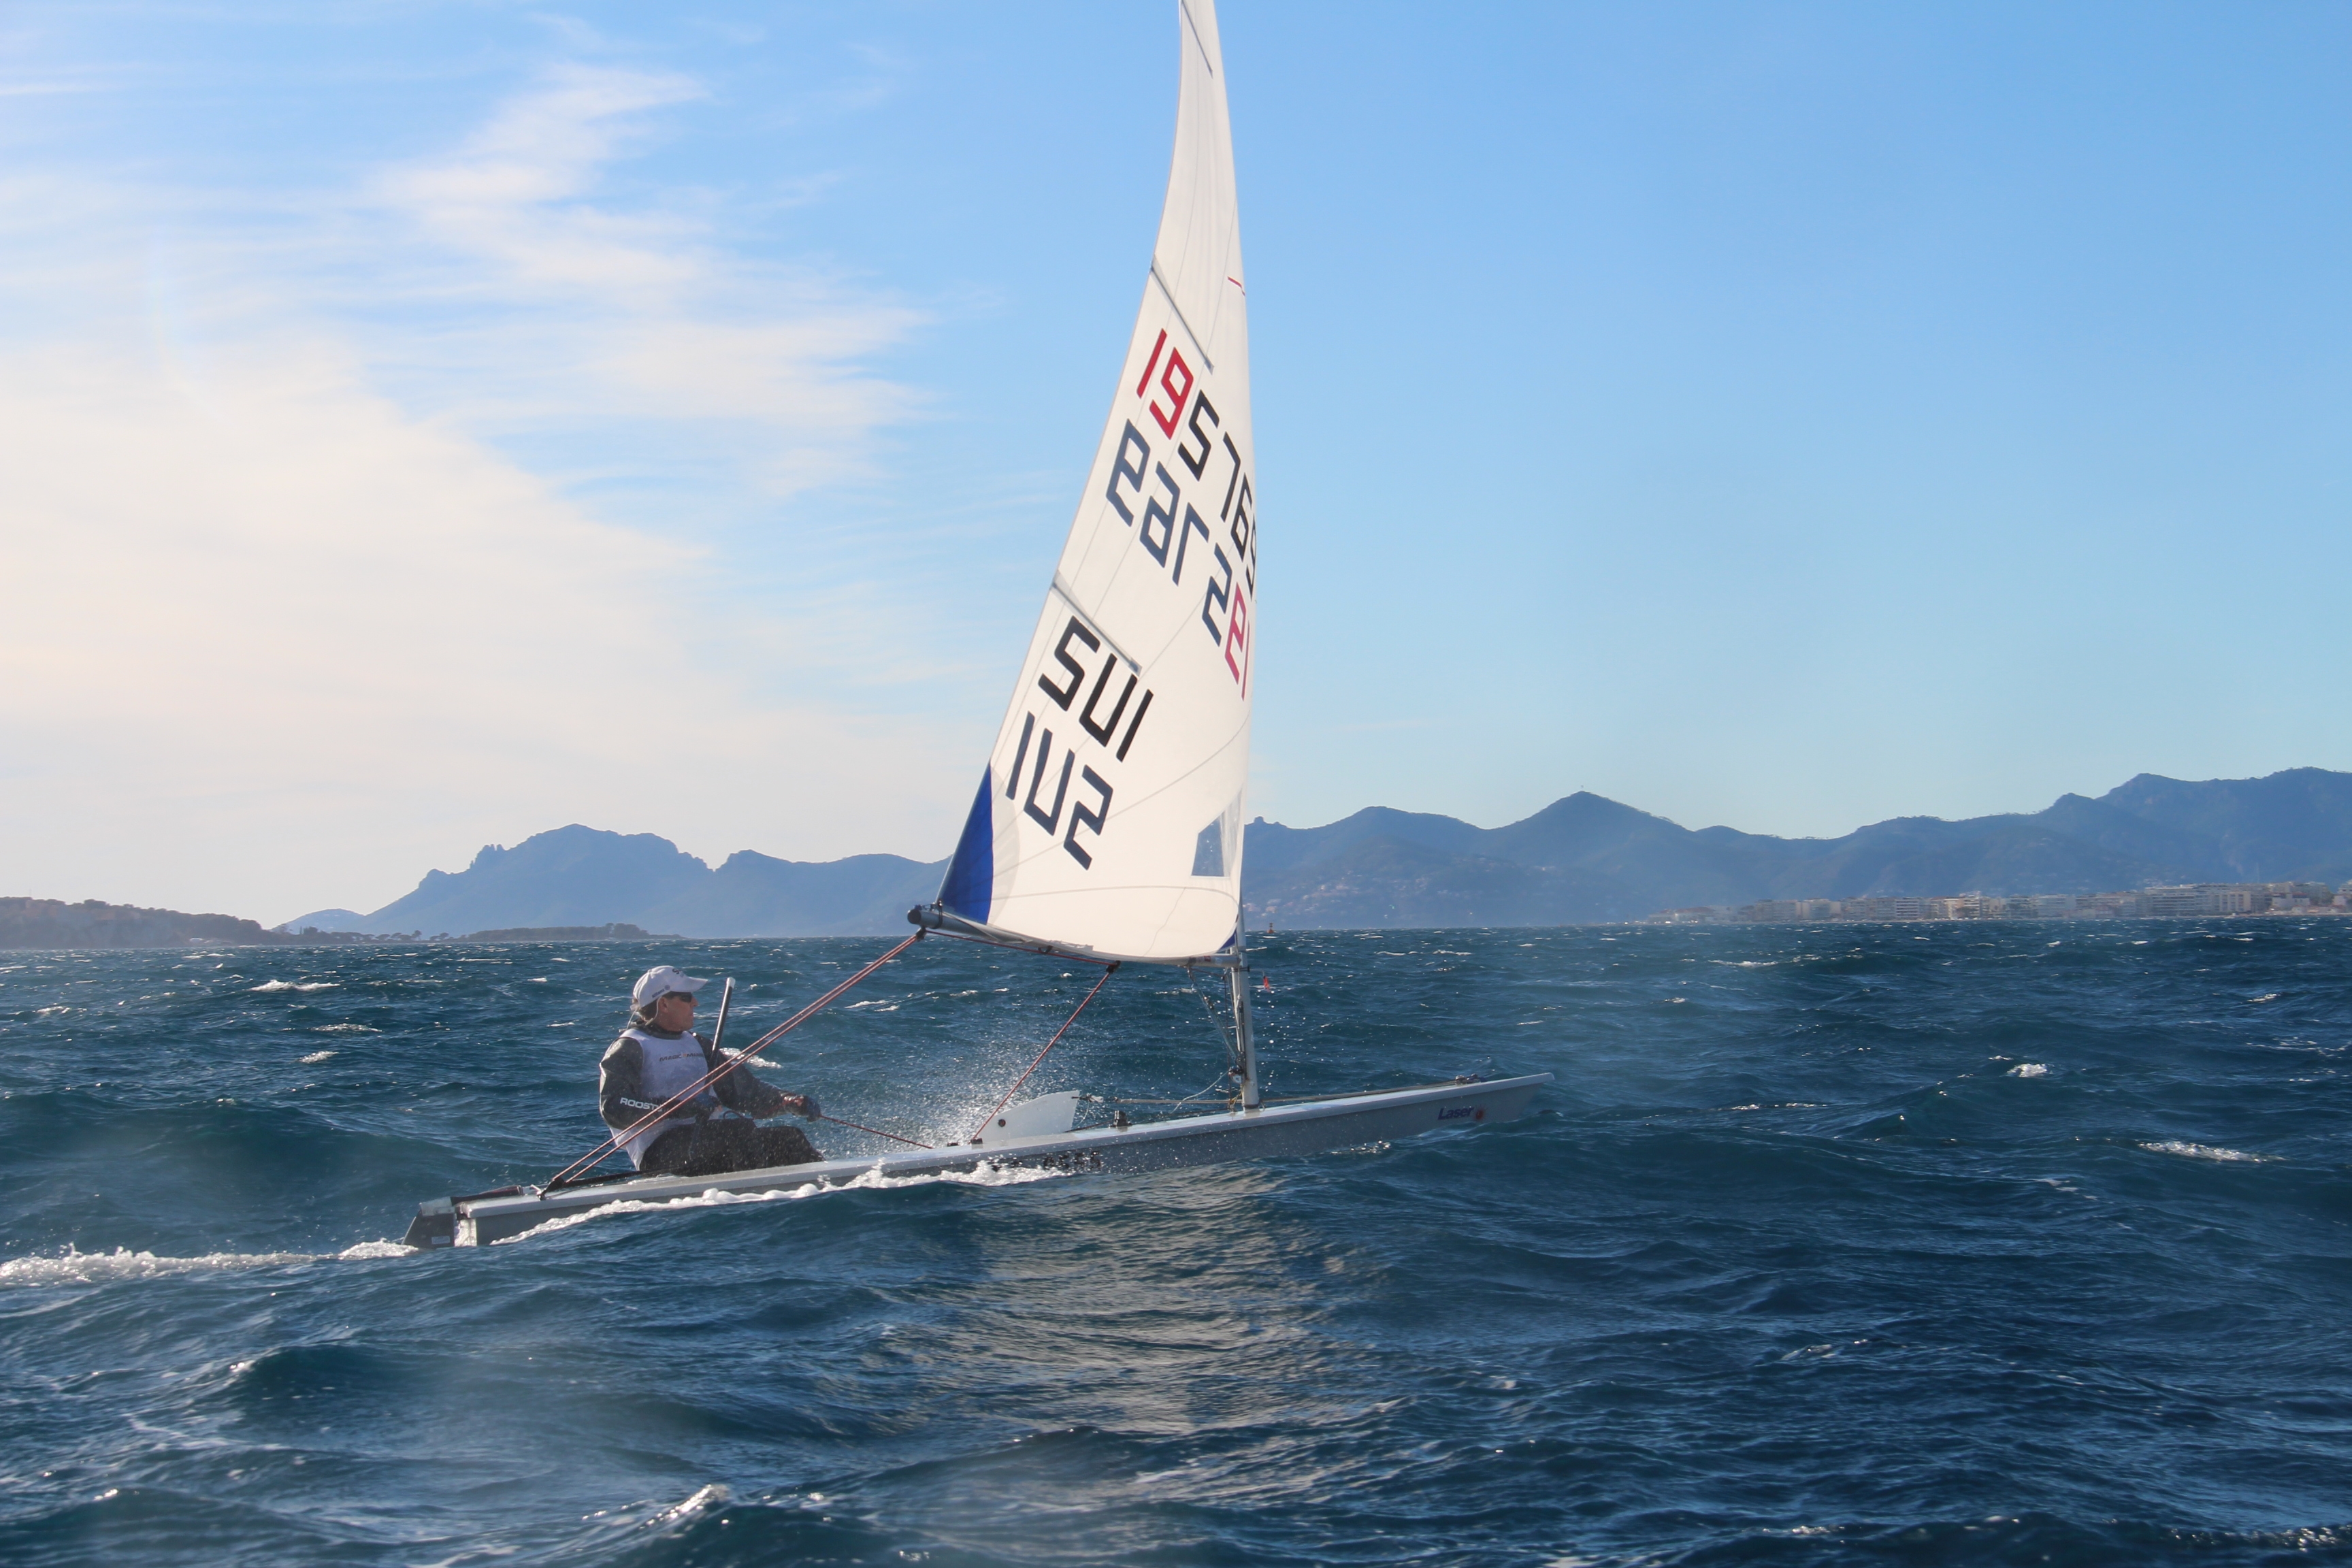  Laser  EuroMaster  Antibes FRA  Day 3, the Swiss